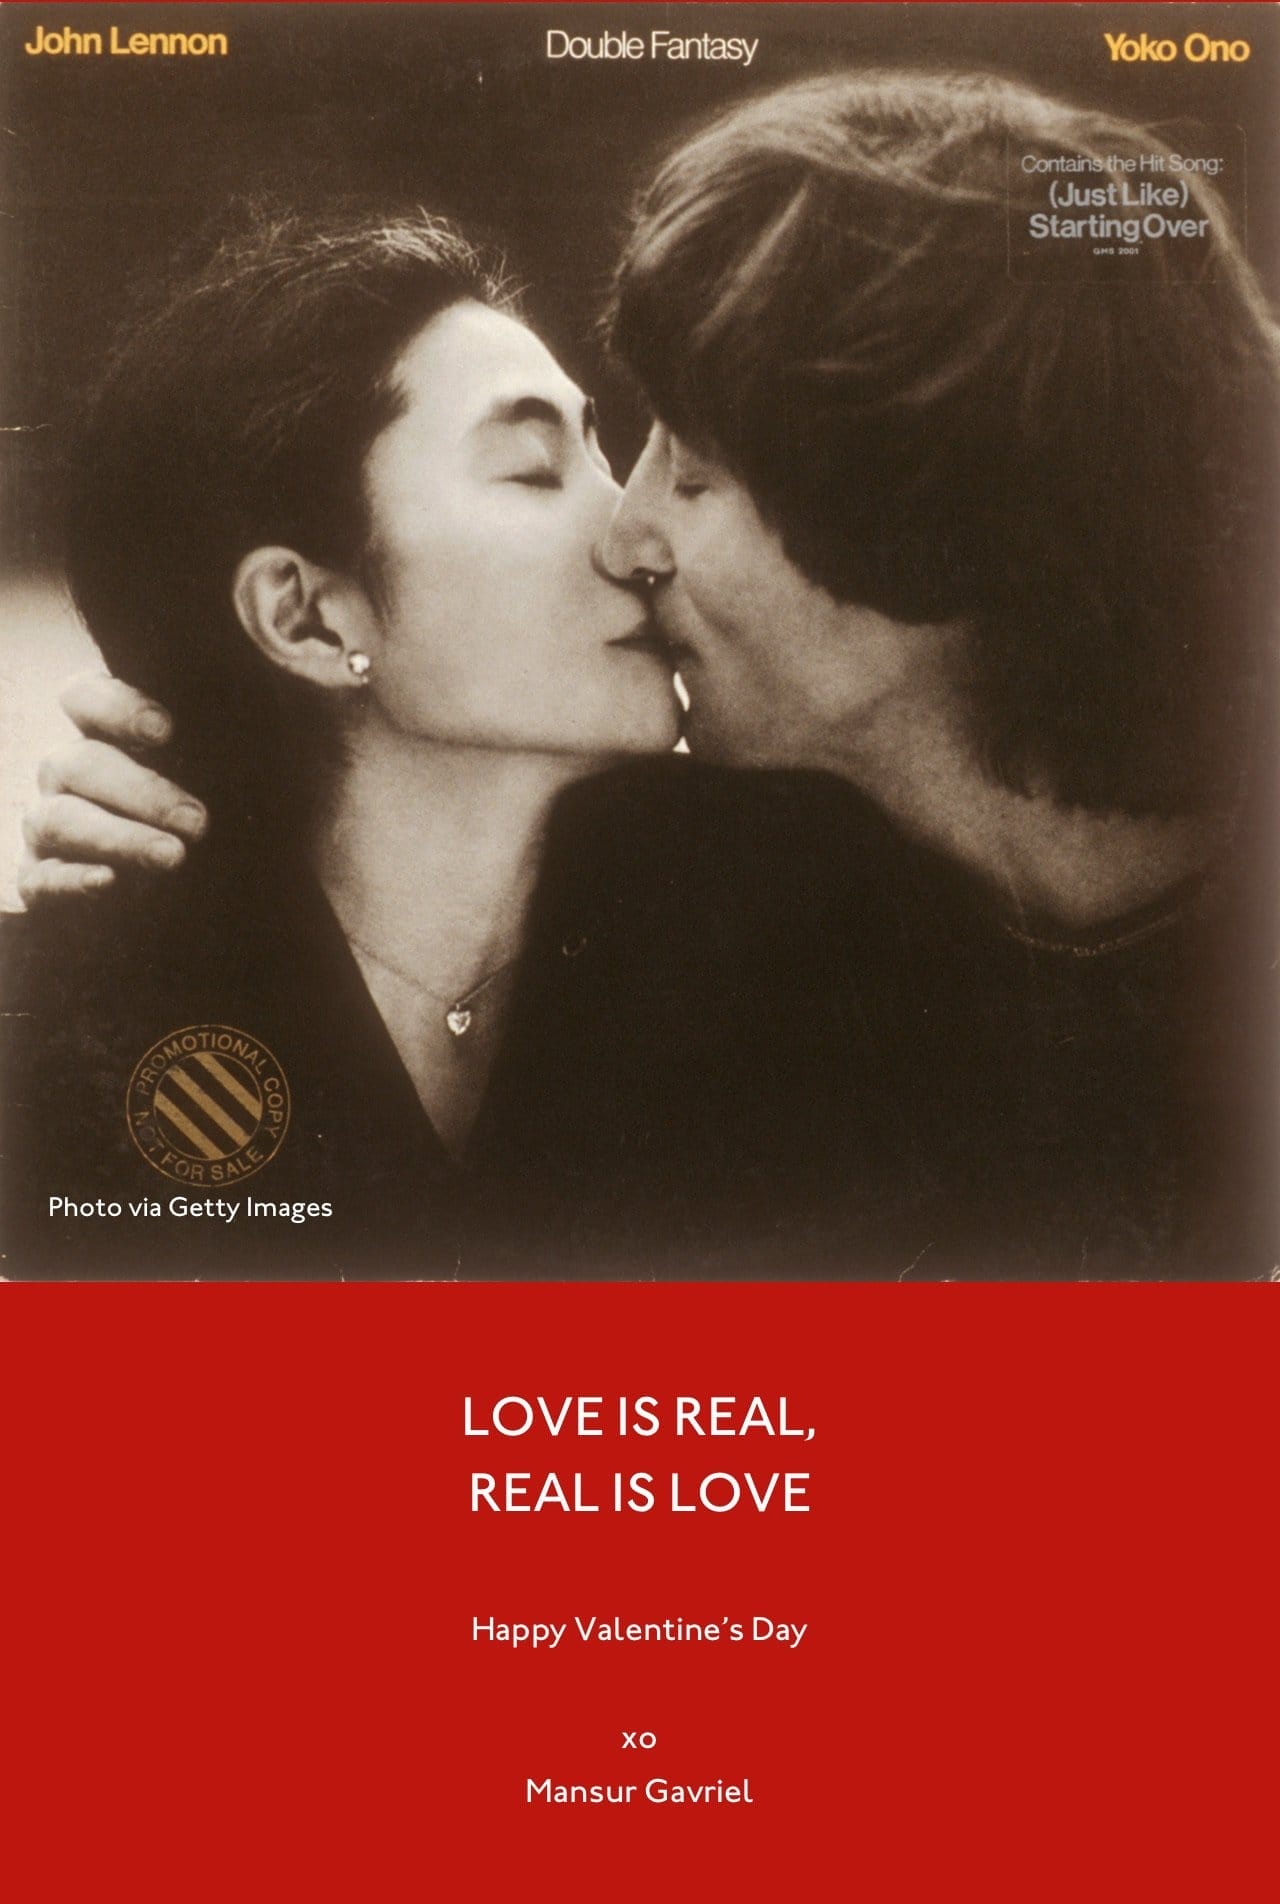 Love is real, real is love. Happy Valentine's Day xo Mansur Gavriel. Pictured: John Lennon and Yoko Ono's Double Fantasy album cover.